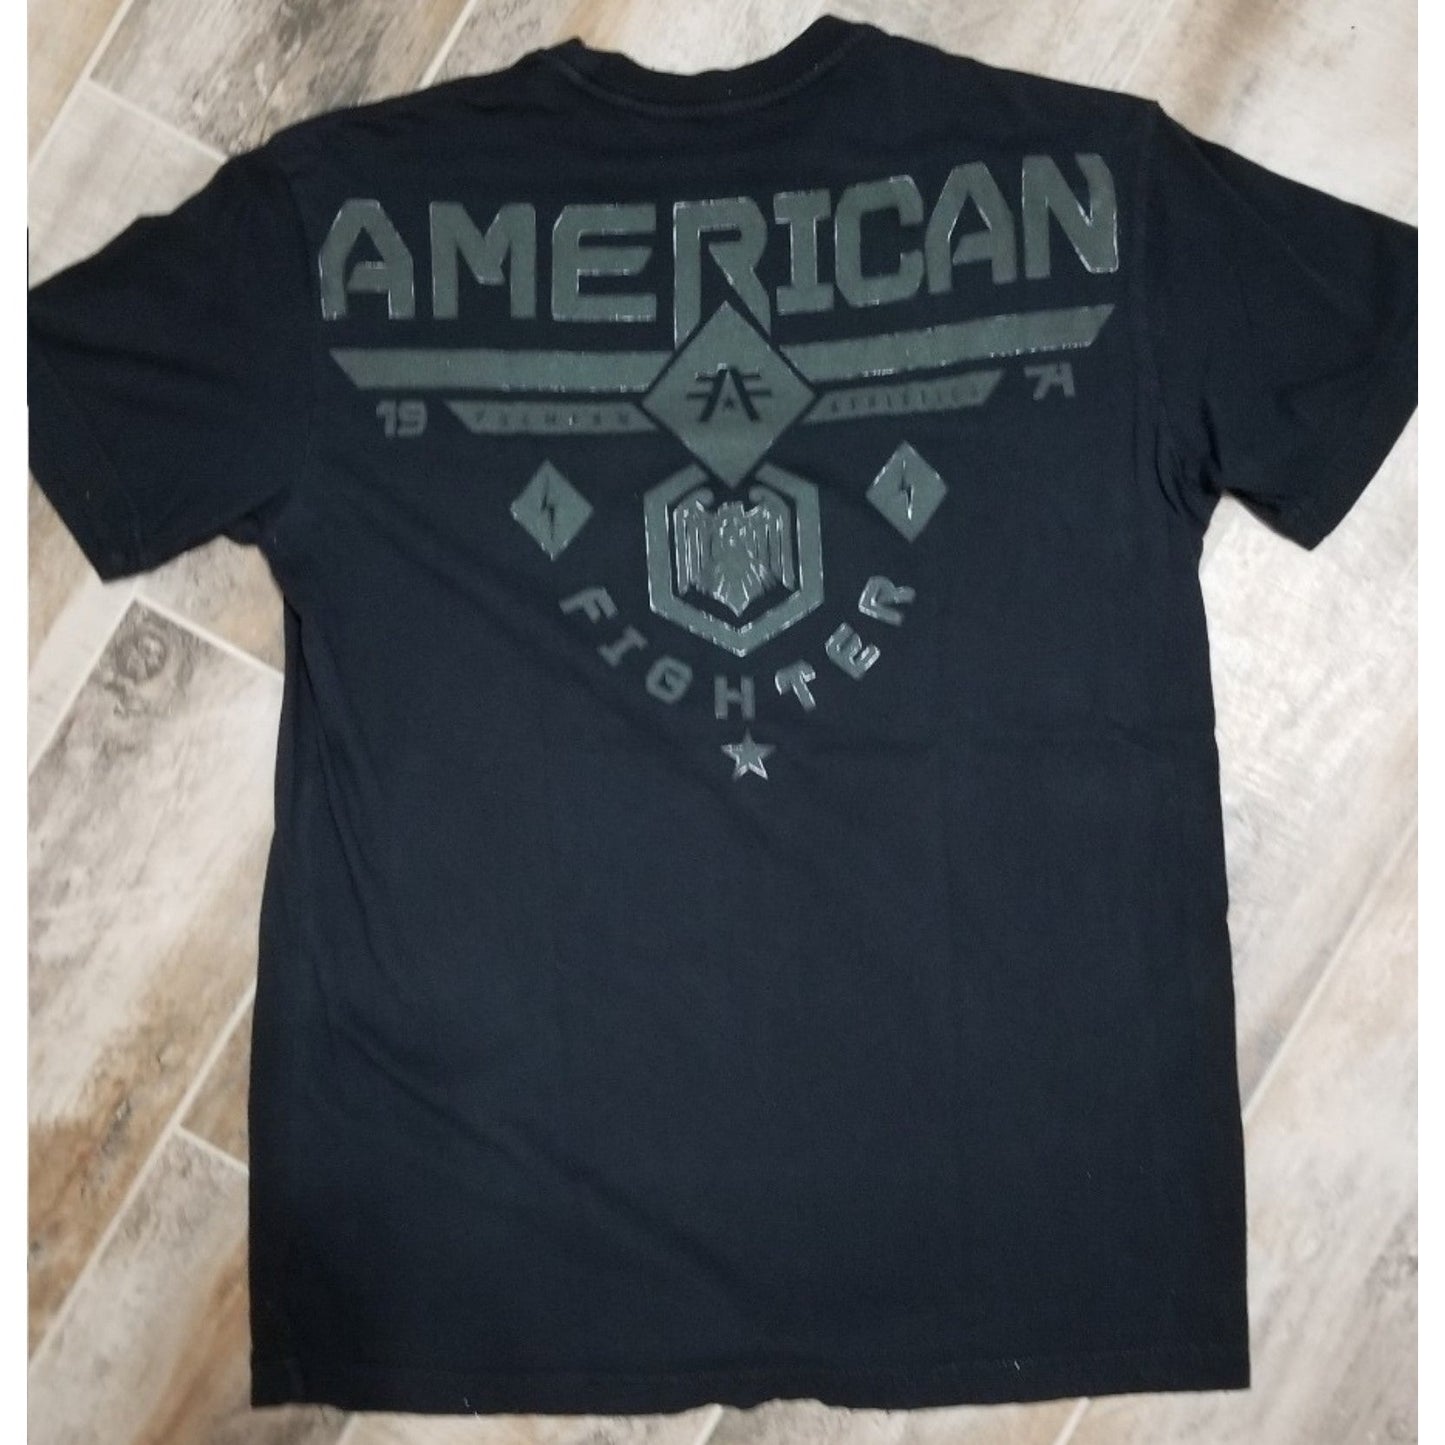 American Fighter T-Shirt